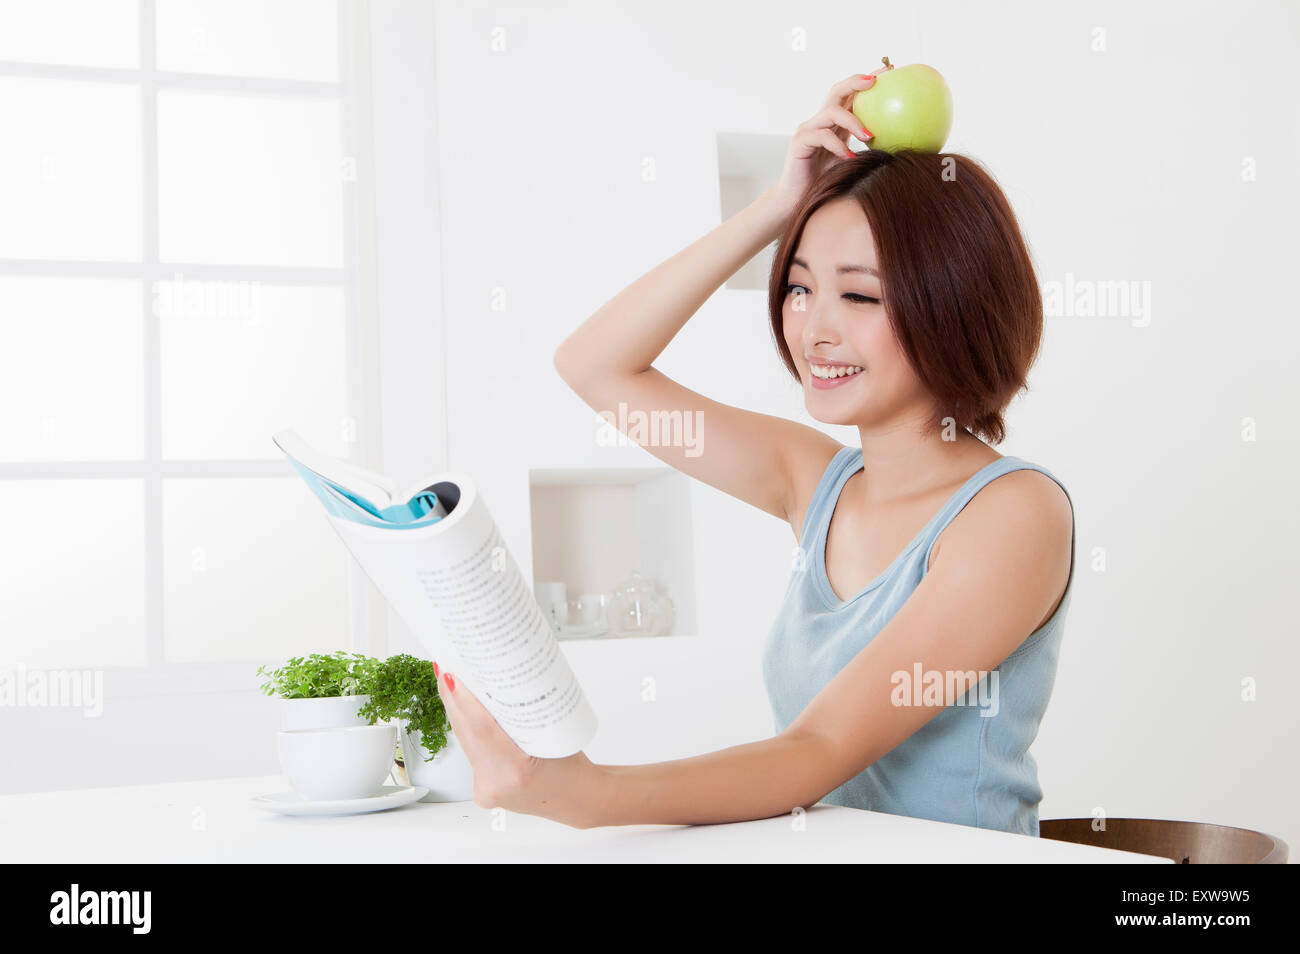 Young woman holding an apple and reading a book with smile, Stock Photo